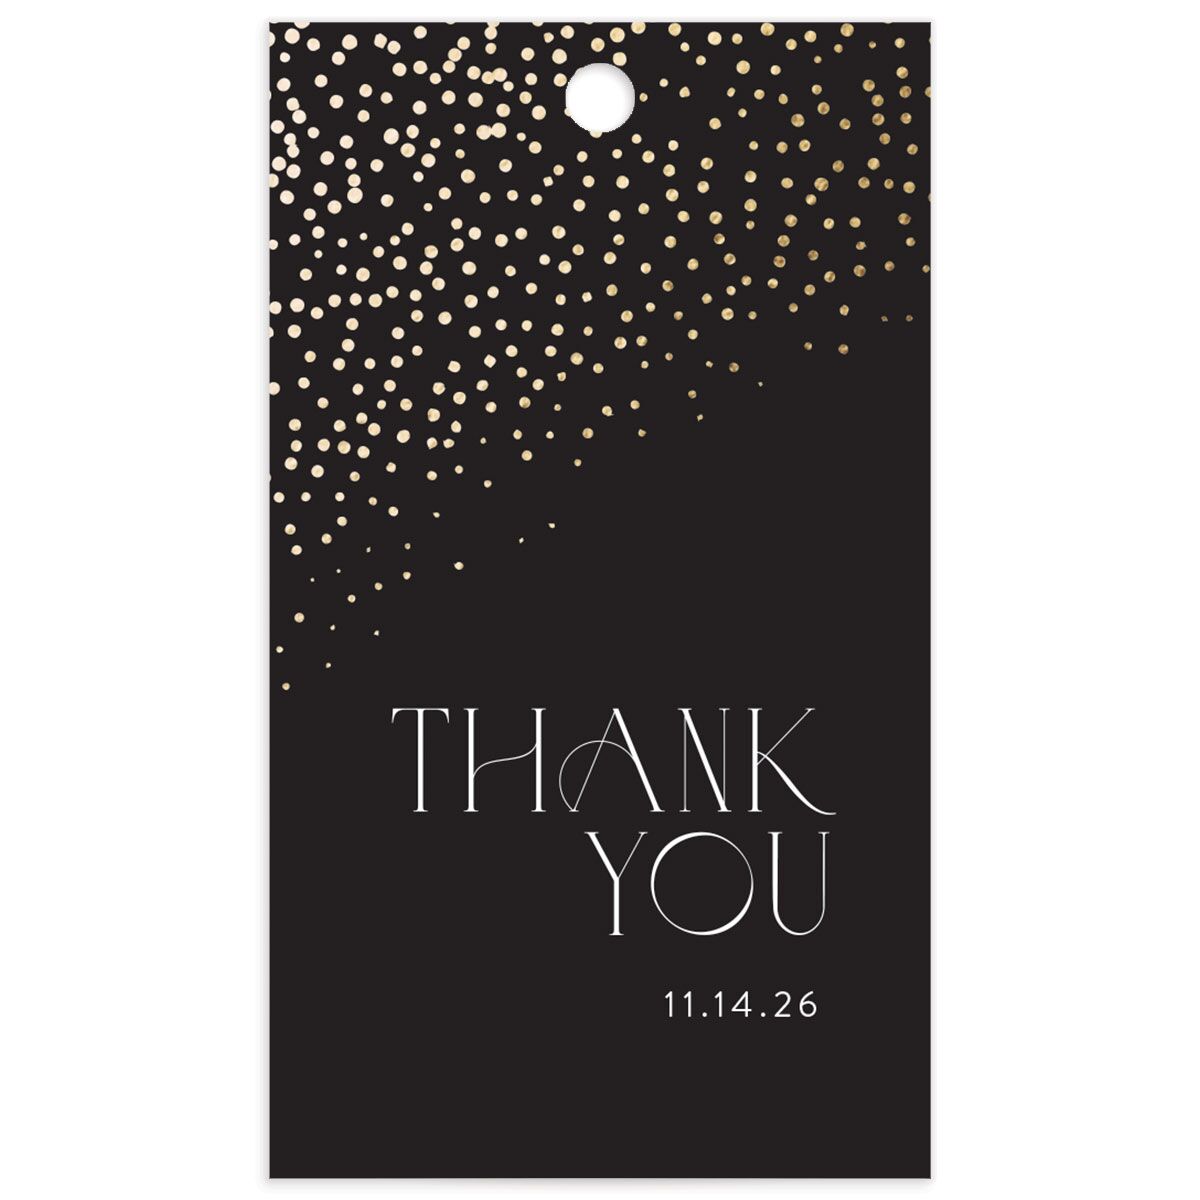 Sweeping Sparkles Favor Gift Tags